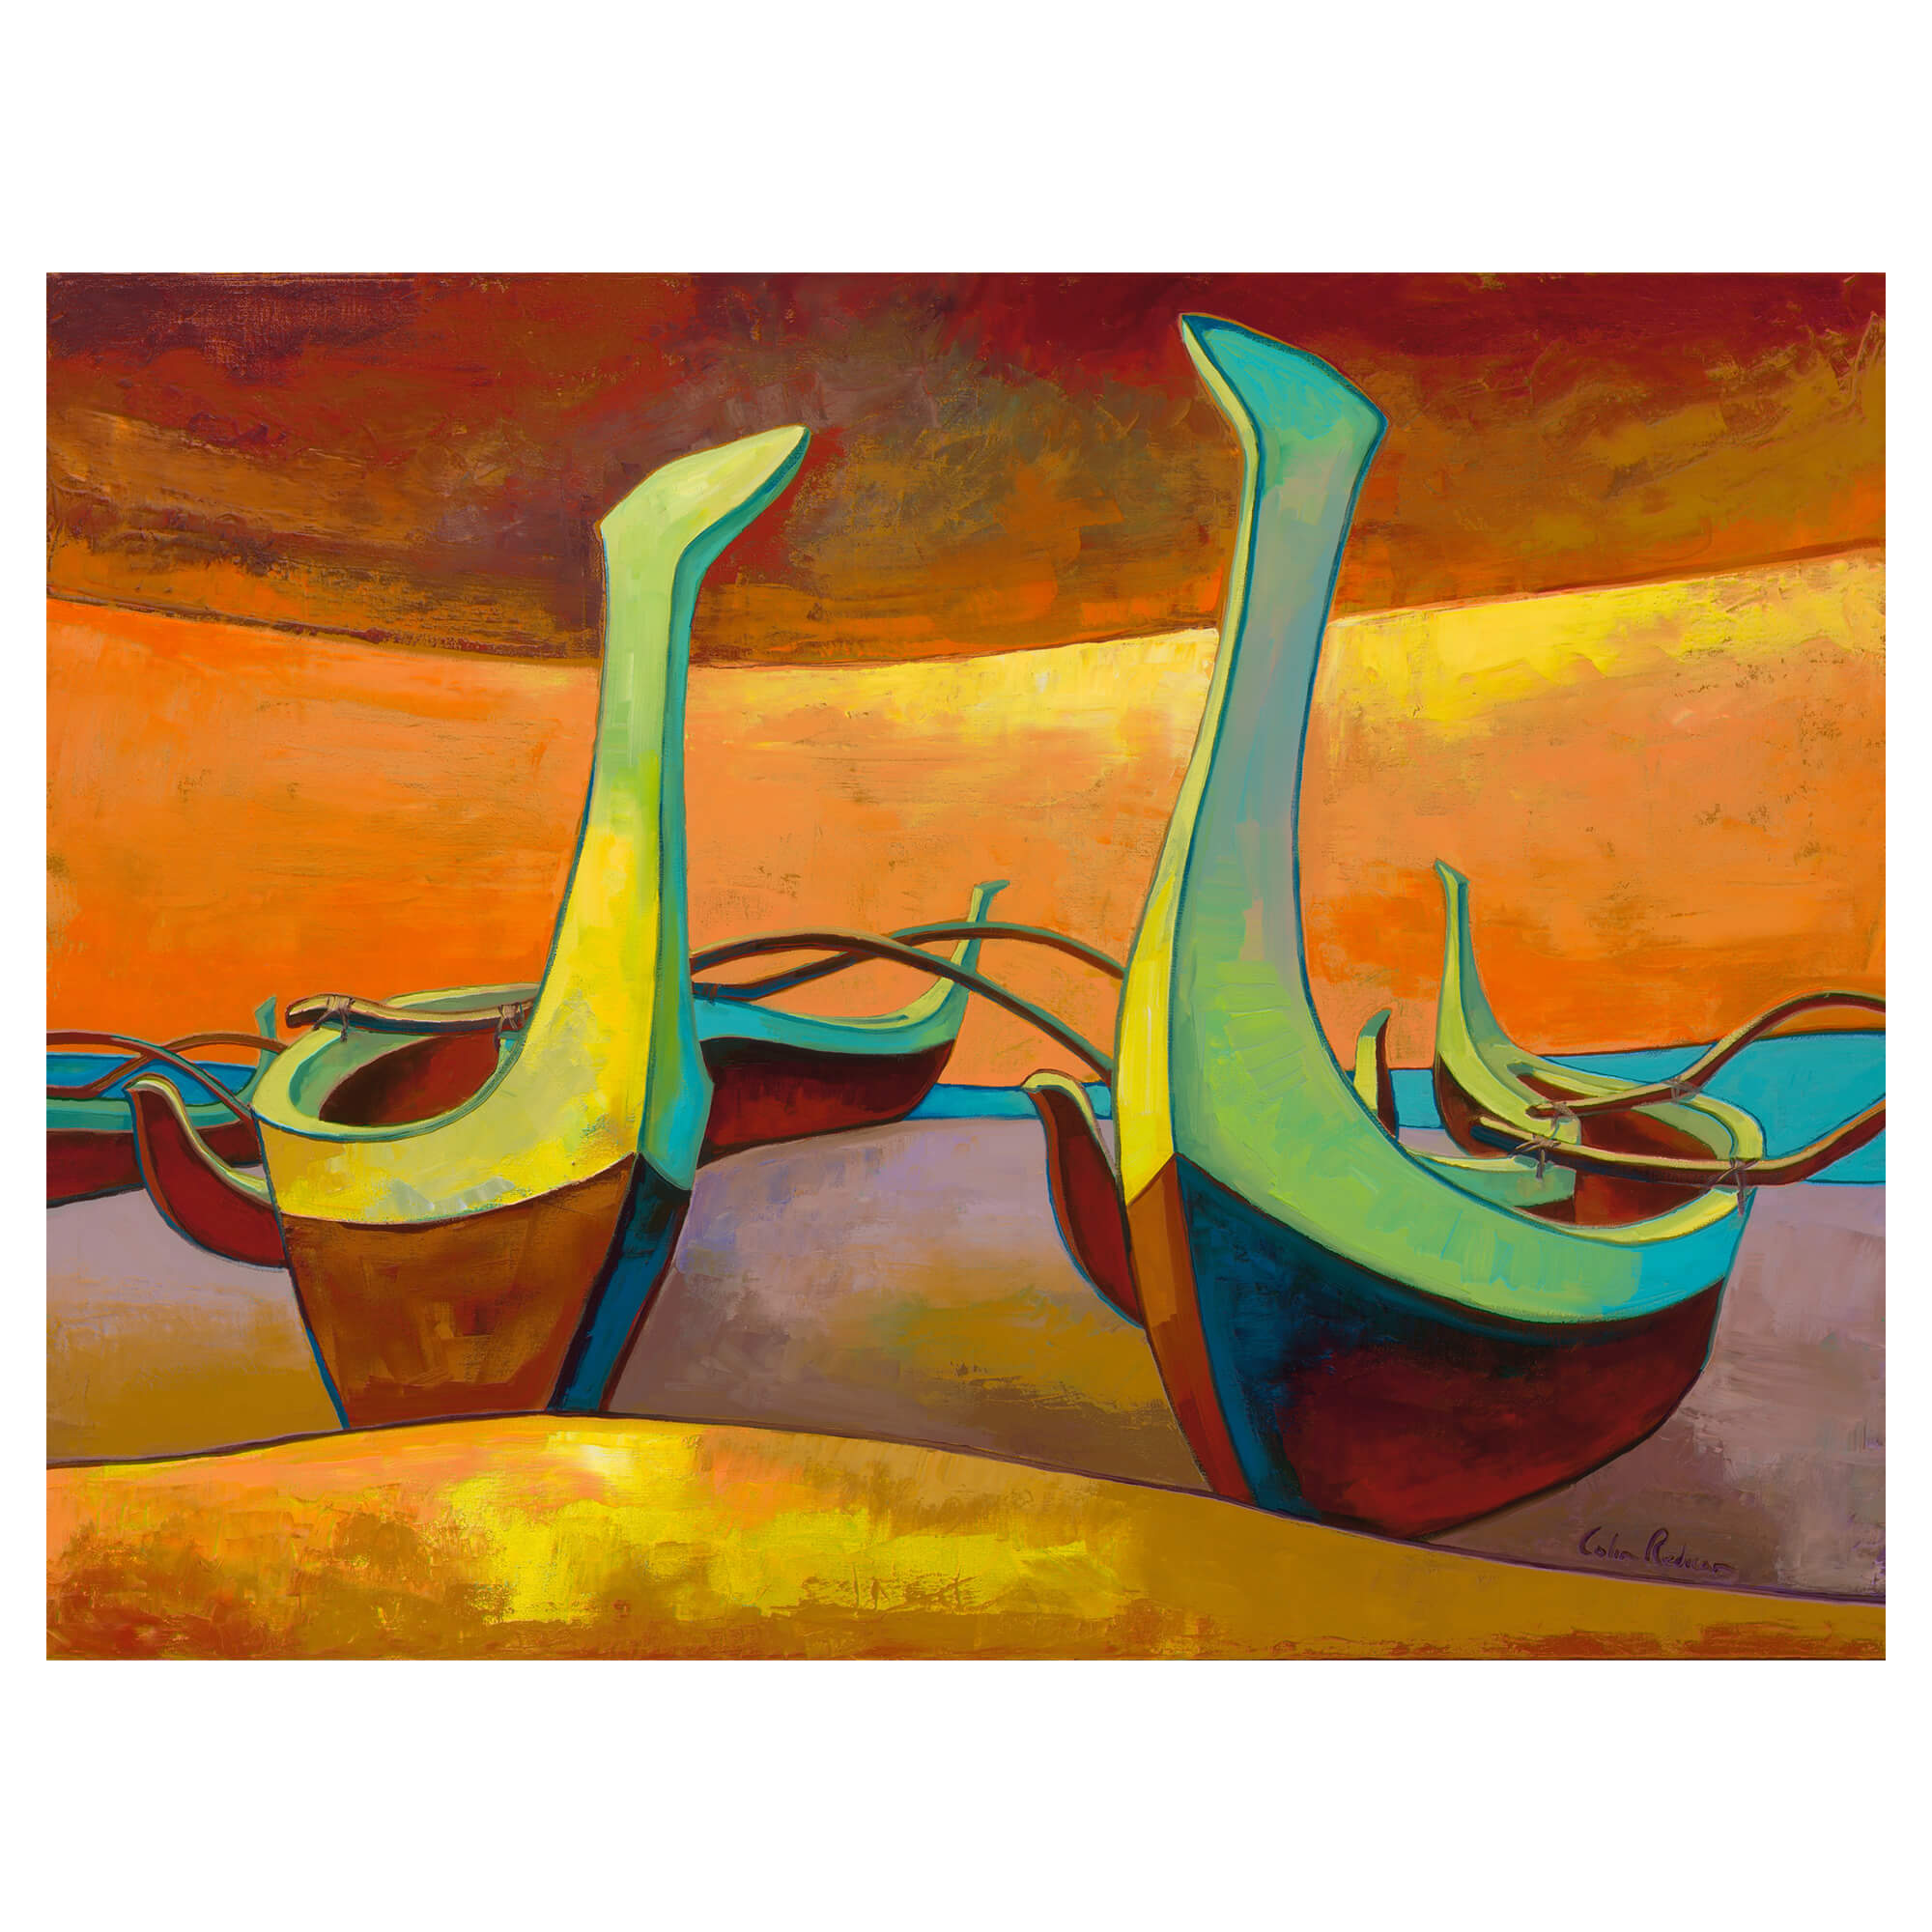 Rustic depiction of two canoes on a shore by Hawaii artist Colin Redican